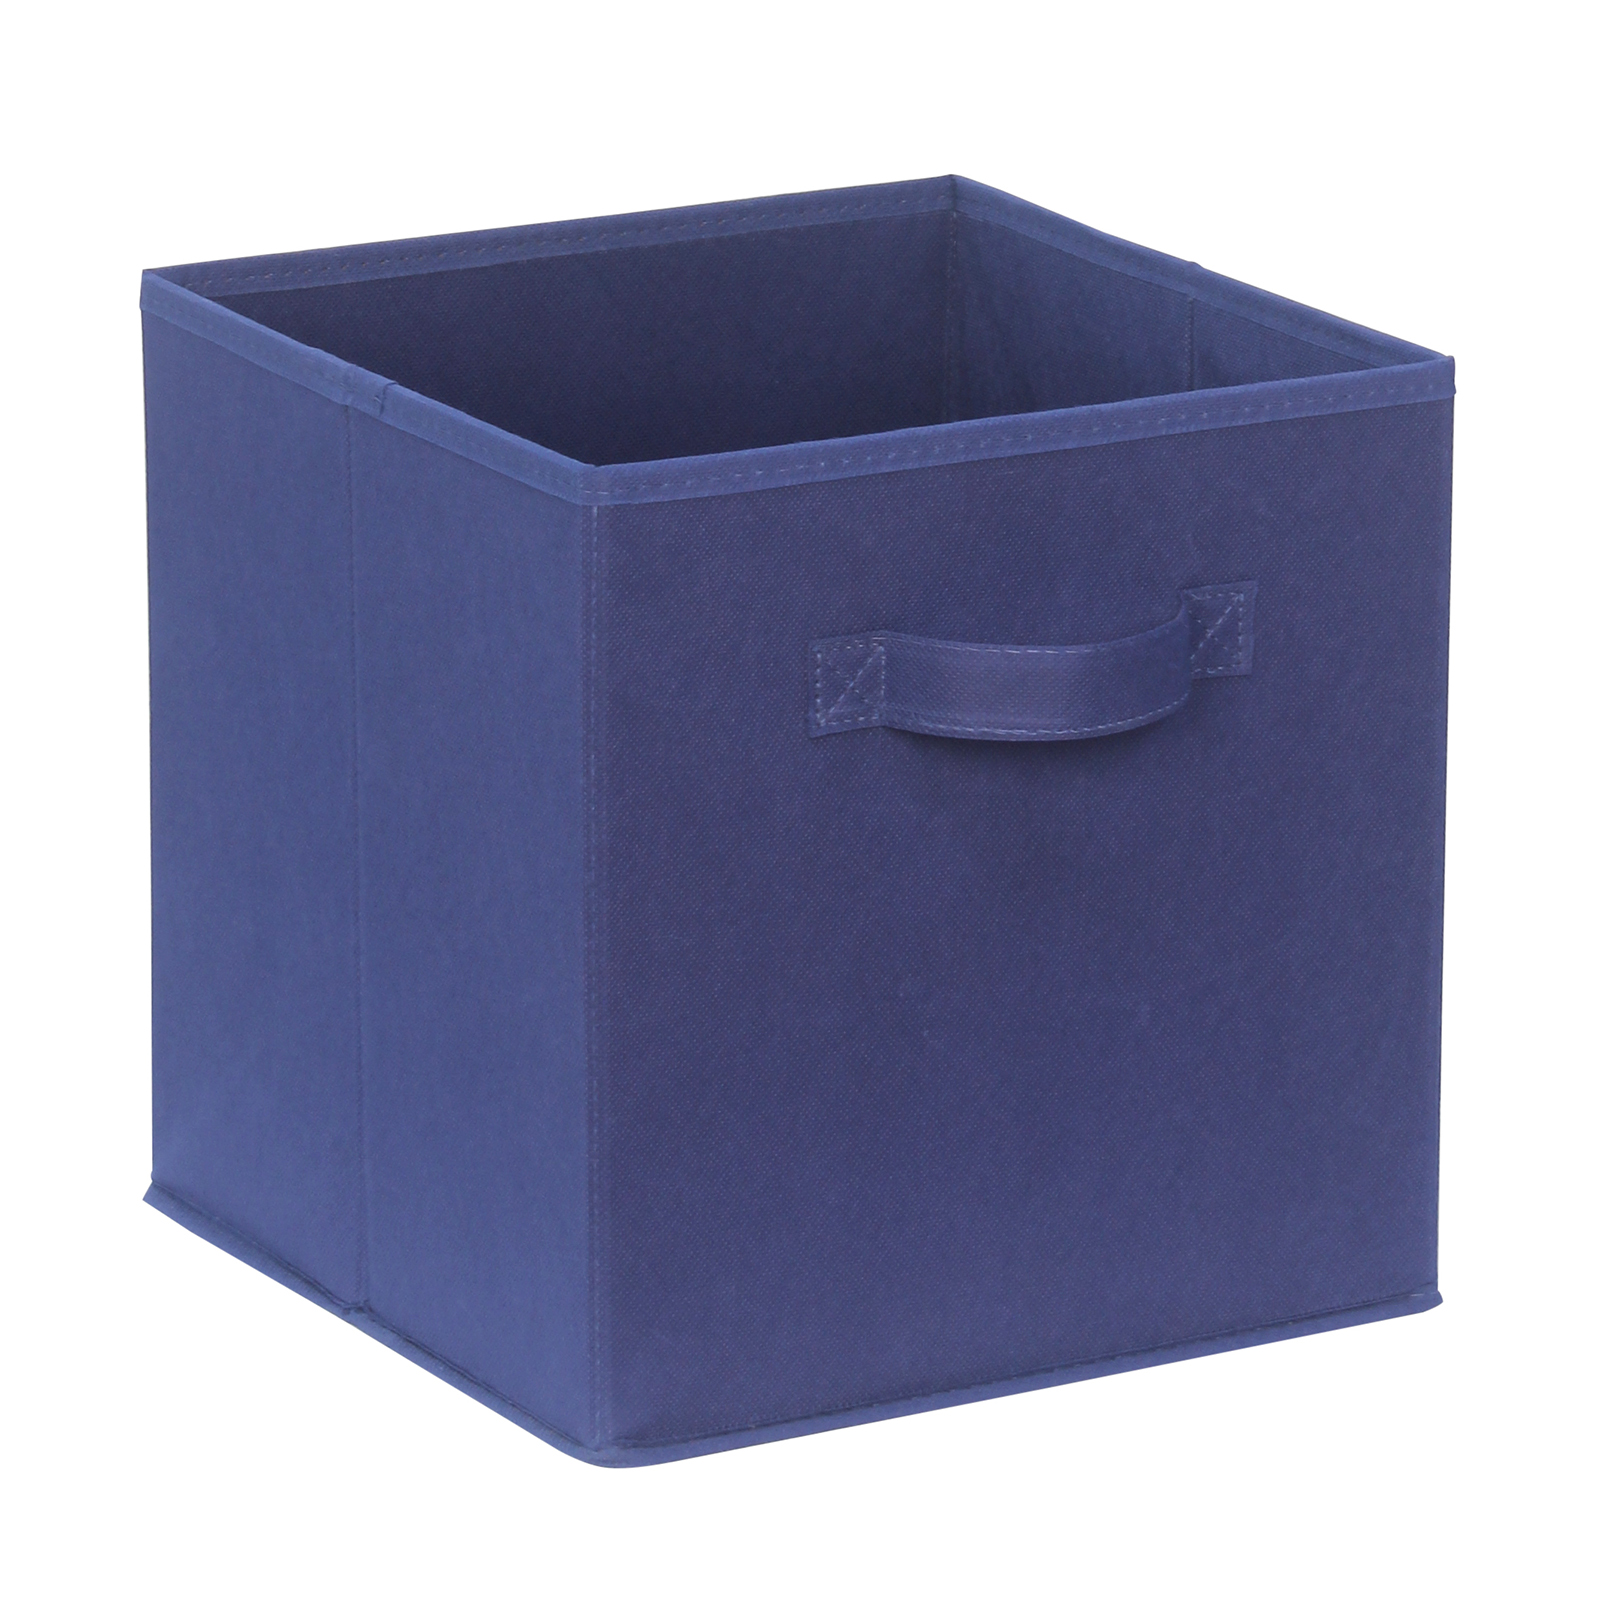 Clever Cube Fabric Insert Navy Blue